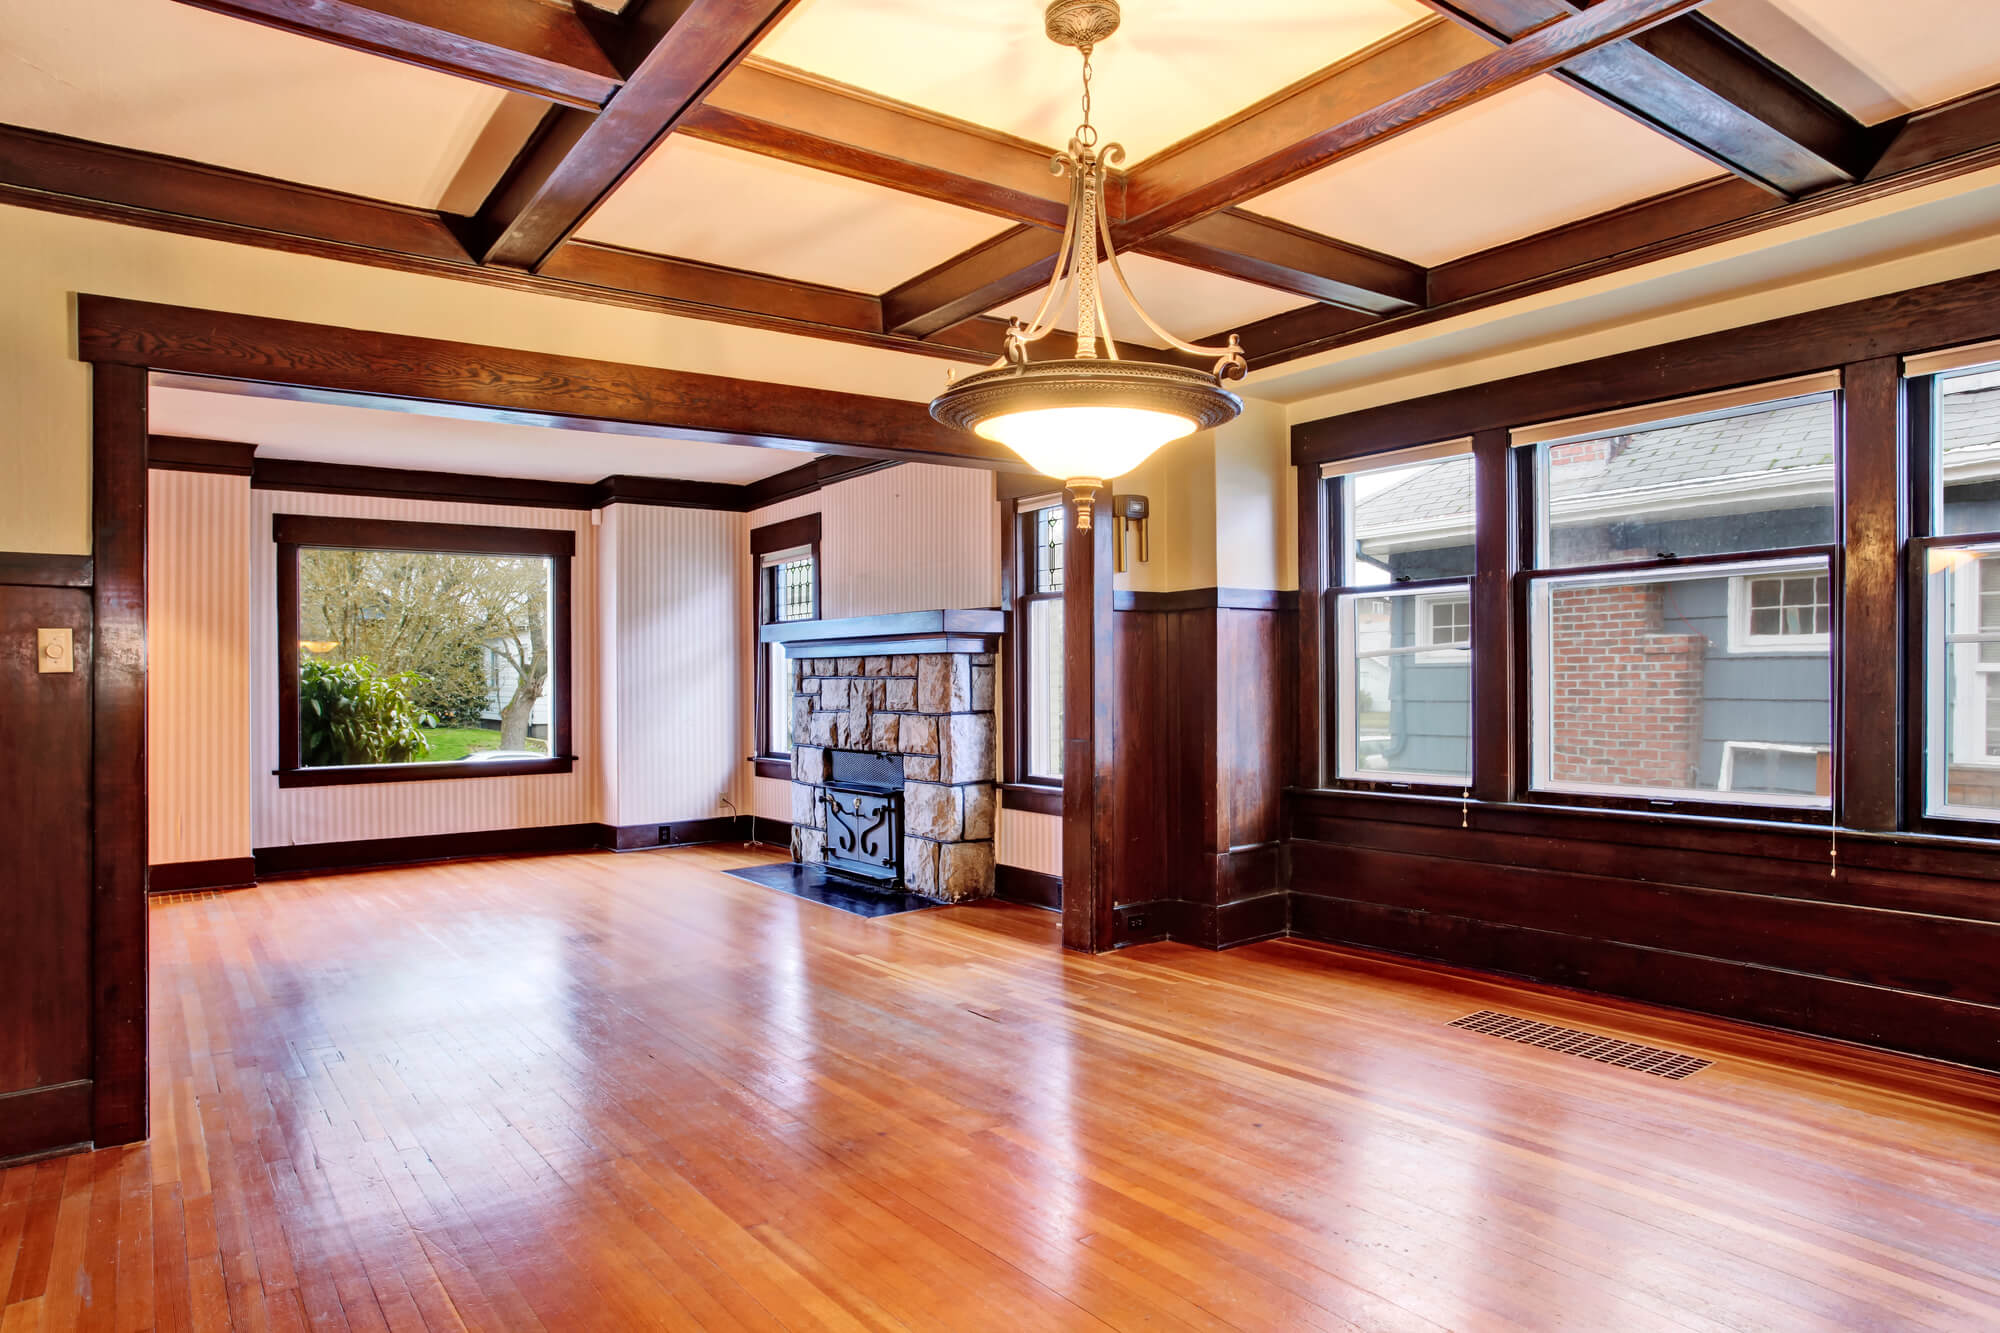 How To Build A Coffered Ceiling With